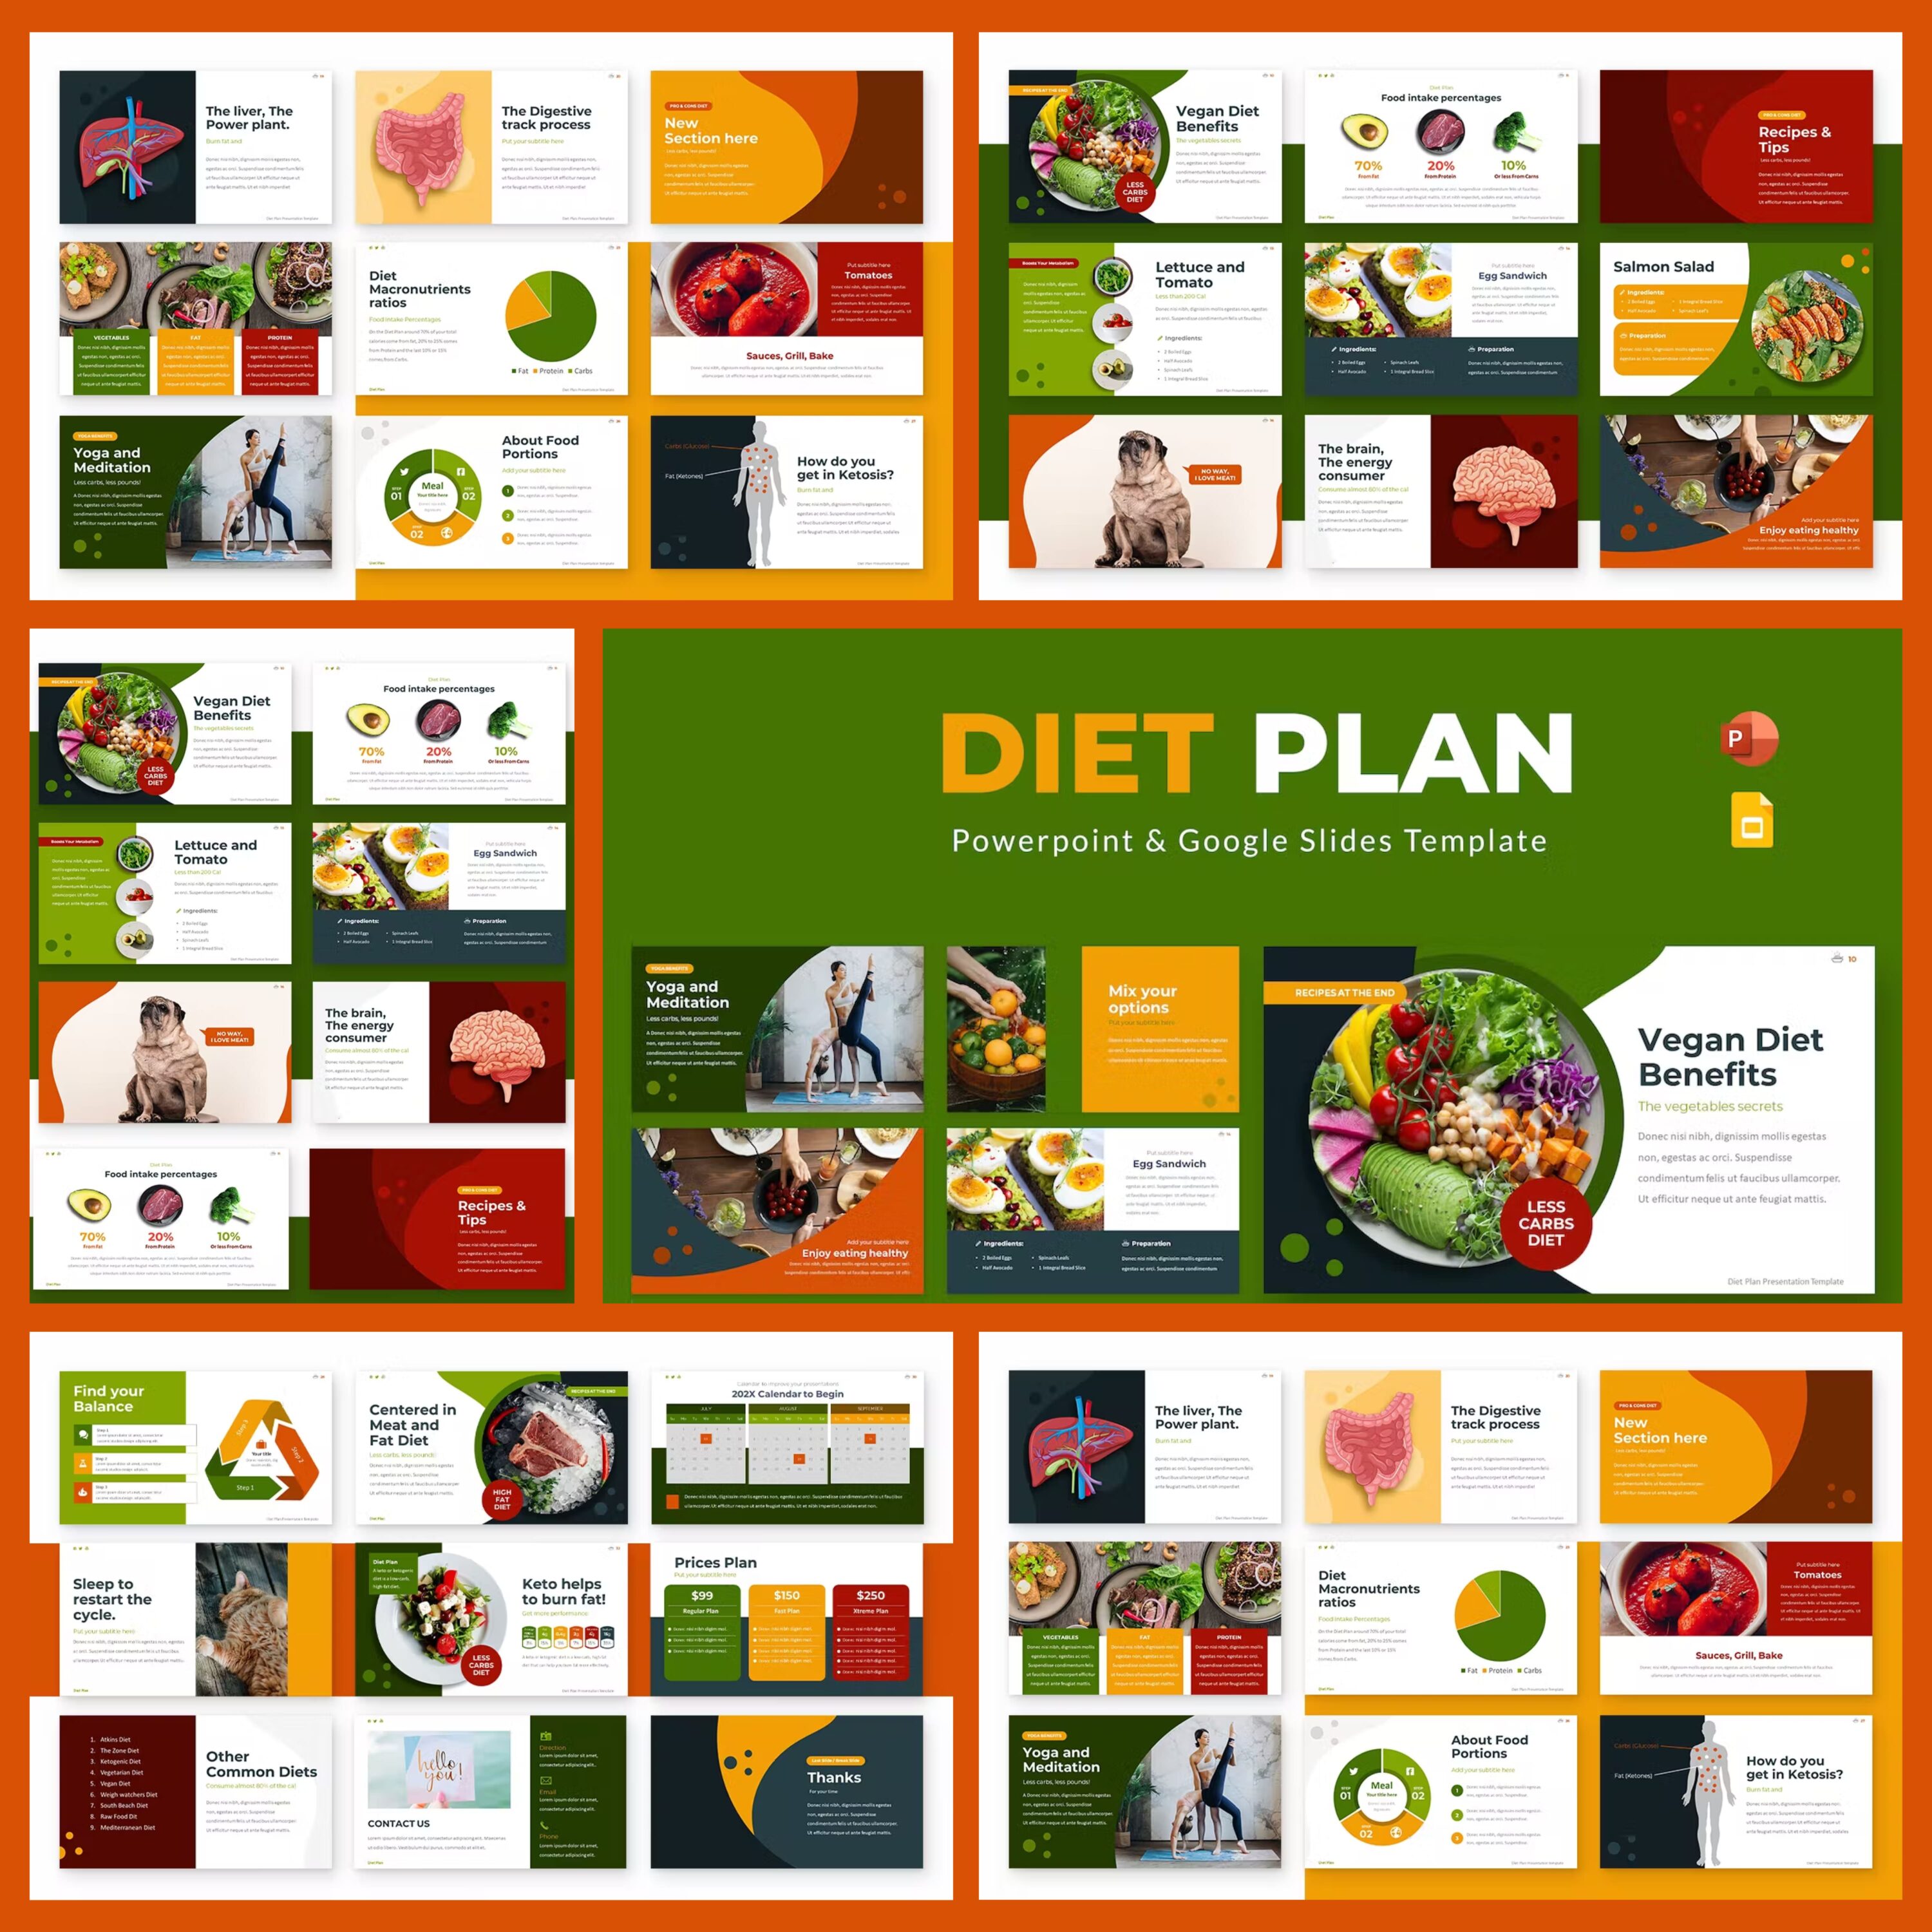 Diet Plan Powerpoint & Google Slides Template from graphicboomstudio.